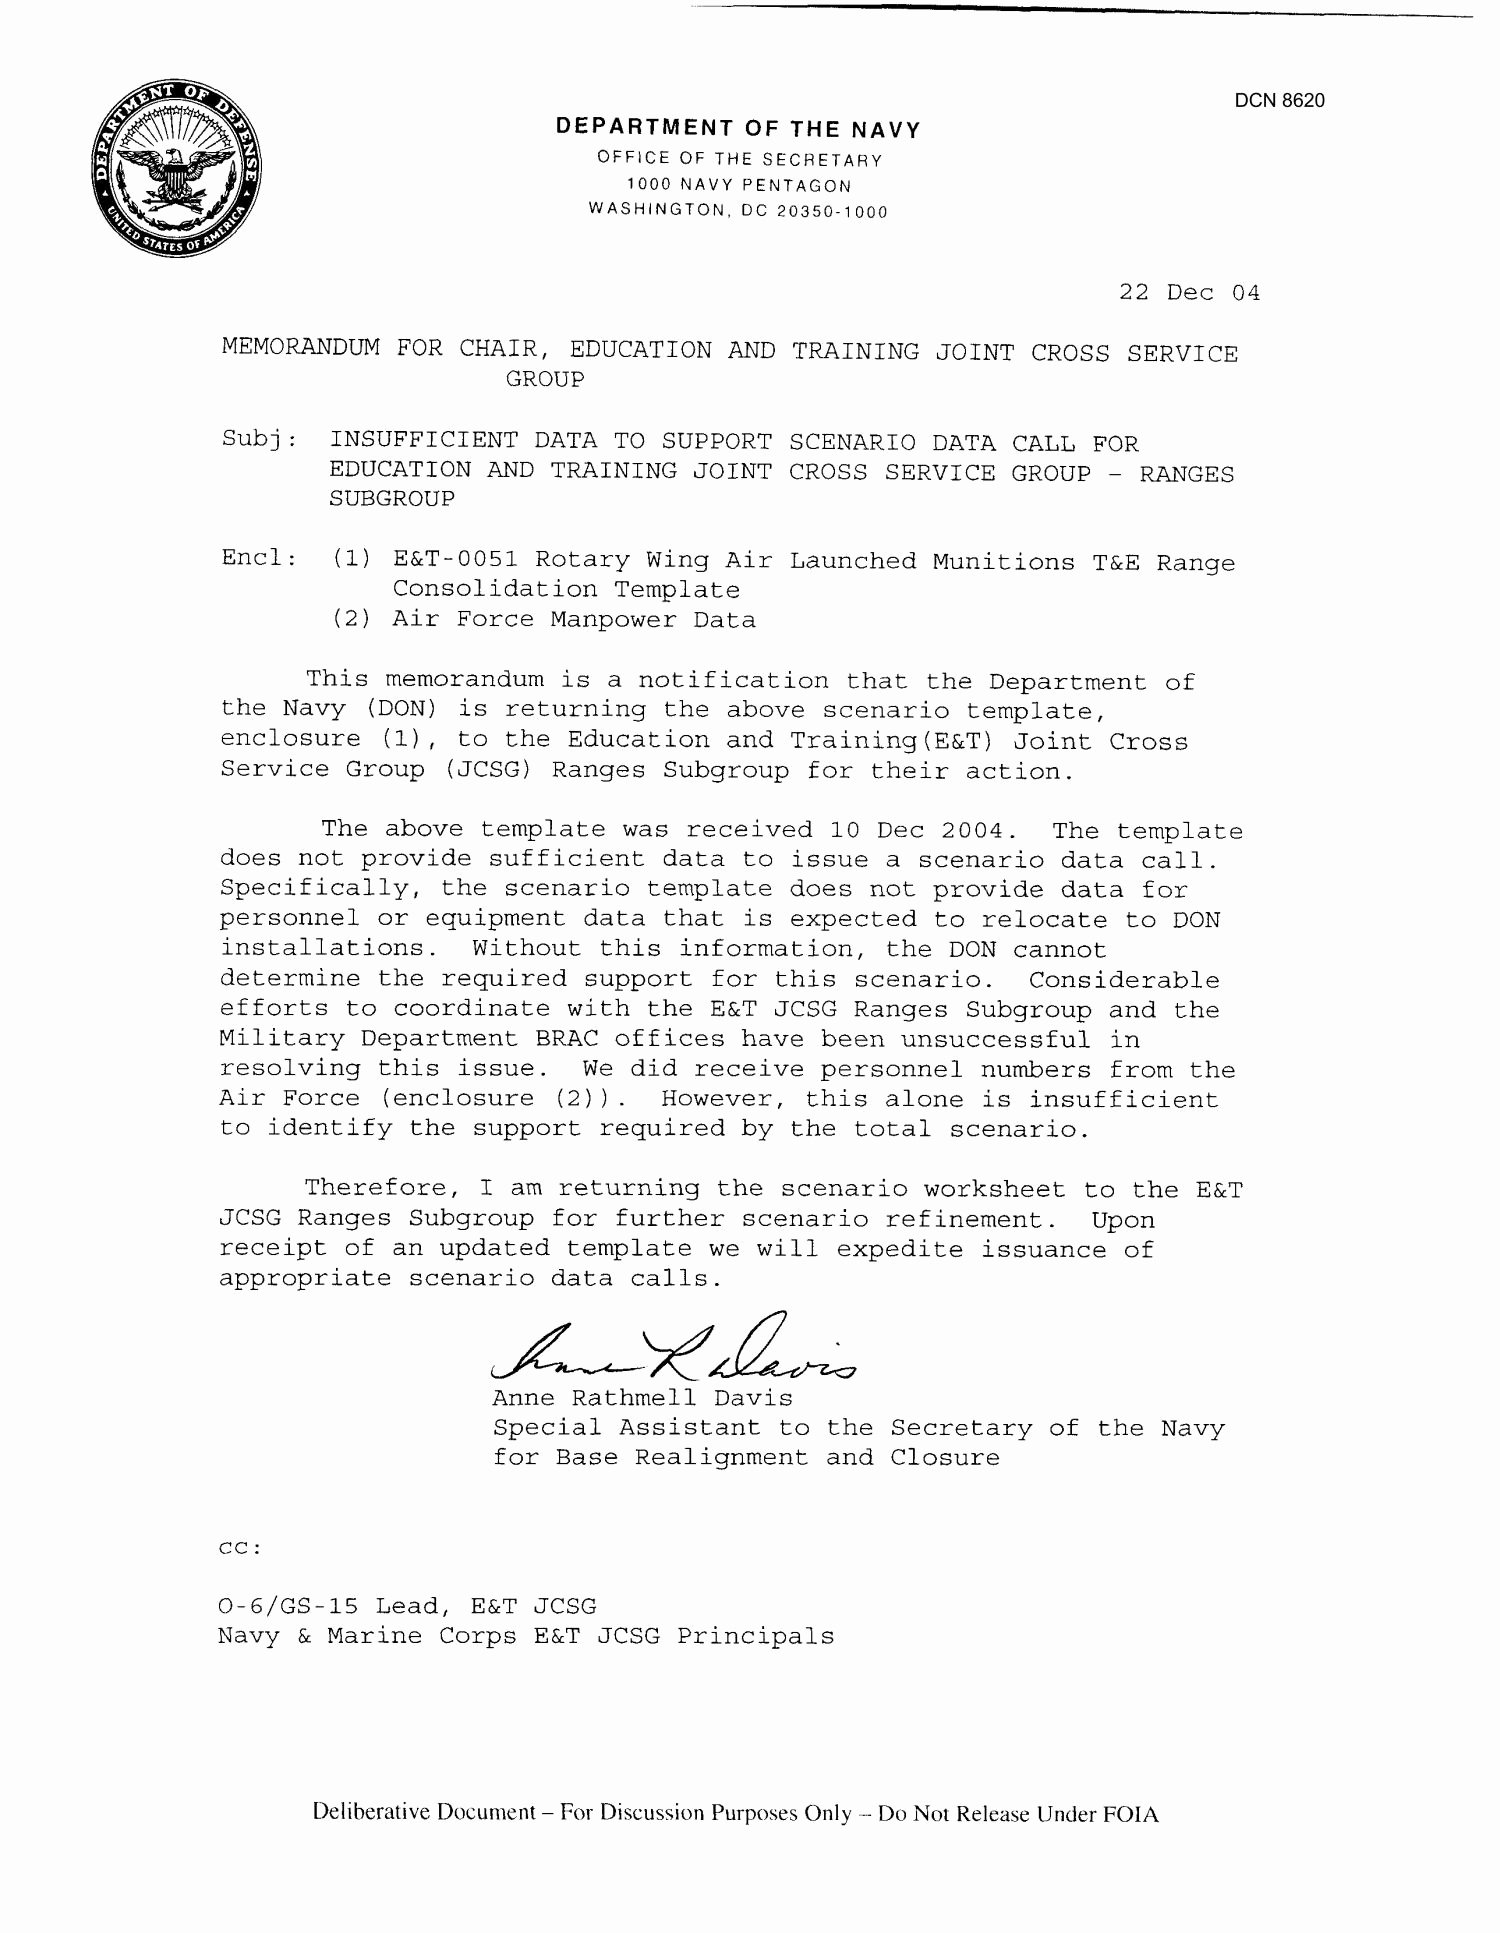 Naval Letter format Template Unique Department Of the Navy Memorandum for Chair Education